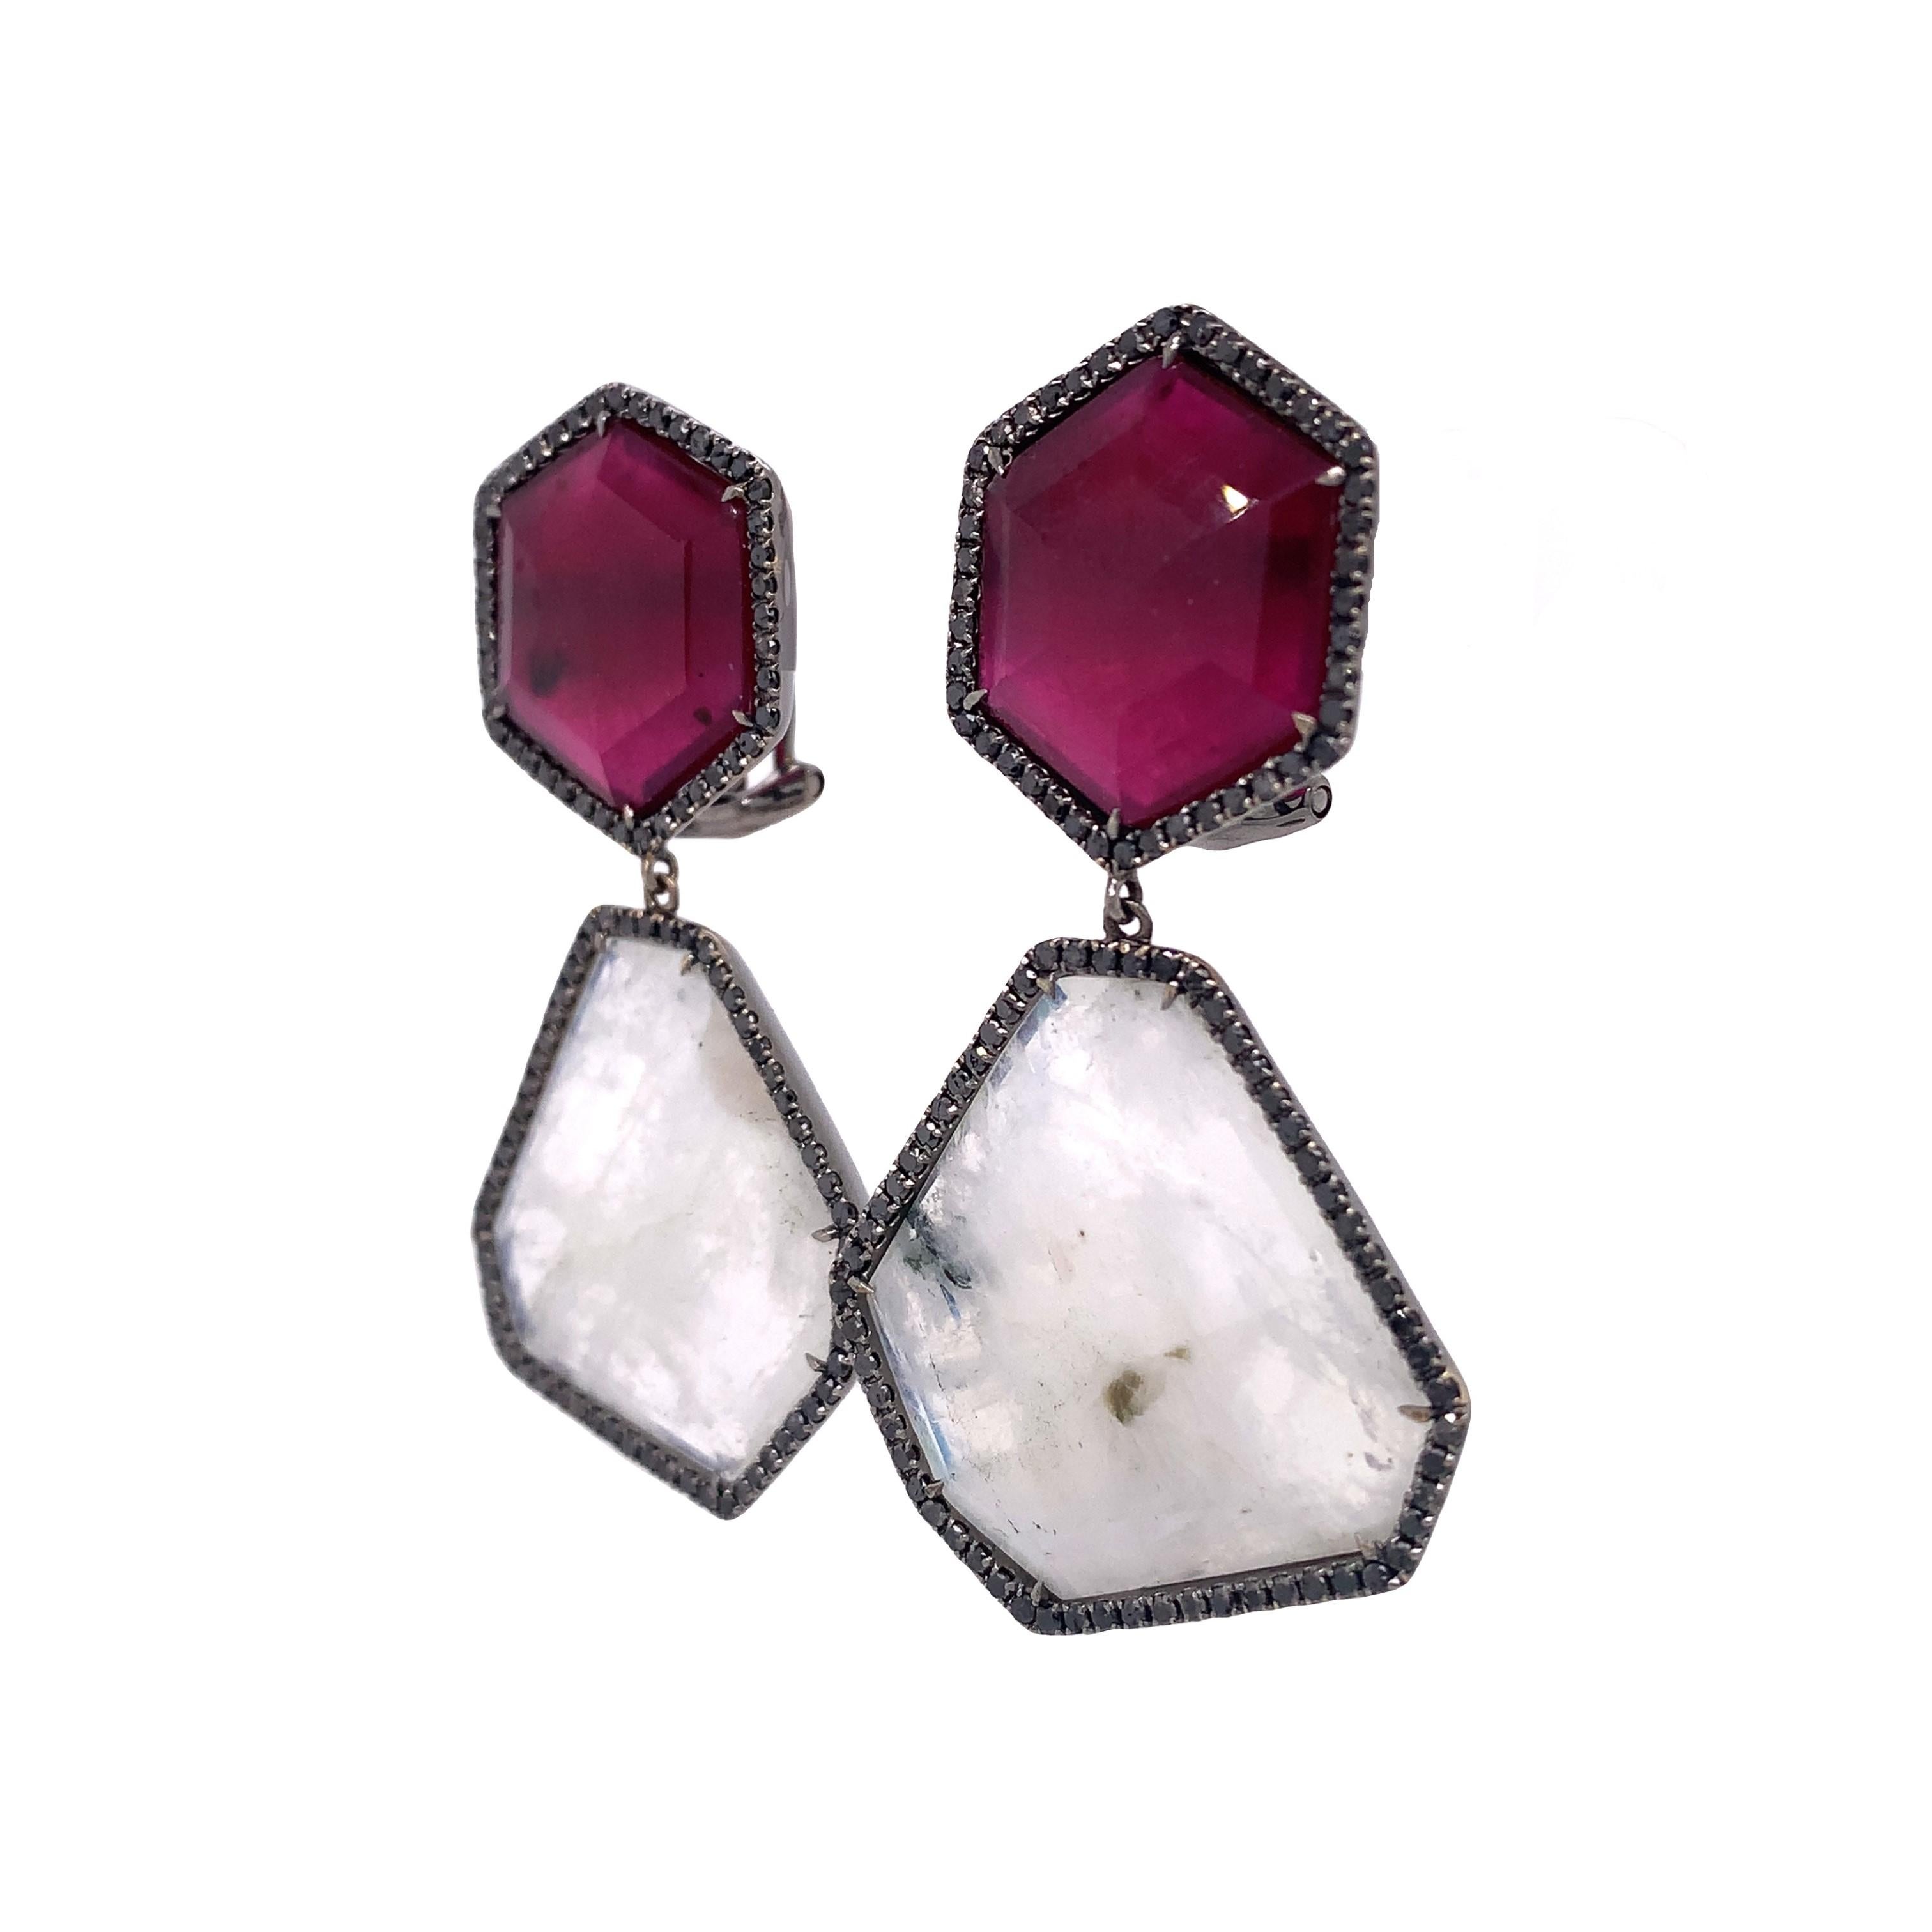 Lillipad Collection

Slice Ruby and Moonstone accented by Black Diamond with clip on drop earrings set in 18k black gold.

Ruby: 34.81ct total weight.
Moonstone: 27.14ct total weight.
Diamond: 1.68ct total weight.
All diamonds are G-H/SI stones.